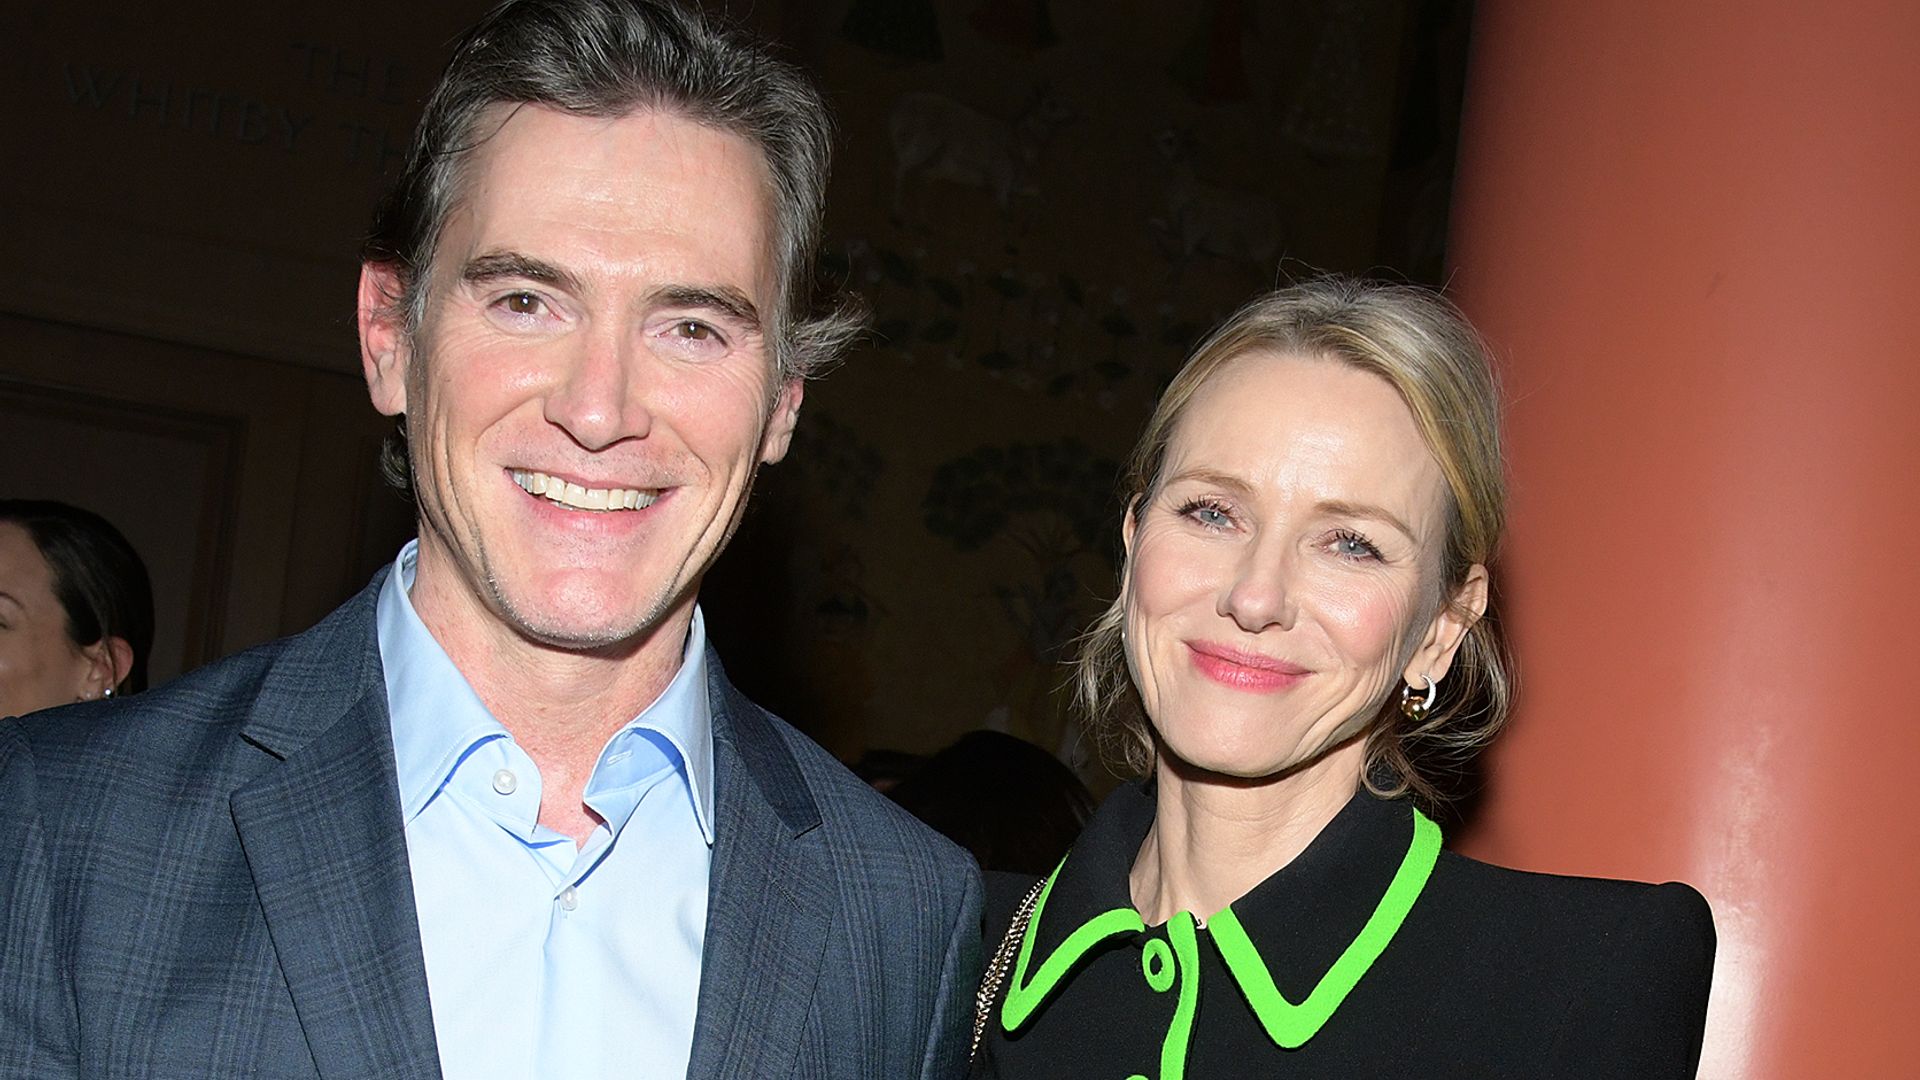 Billy Crudup and Naomi Watts at the premiere of "Hello Tomorrow" held at The Whitby Hotel on February 15, 2023 in New York City. (Photo by Kristina Bumphrey/Variety via Getty Images